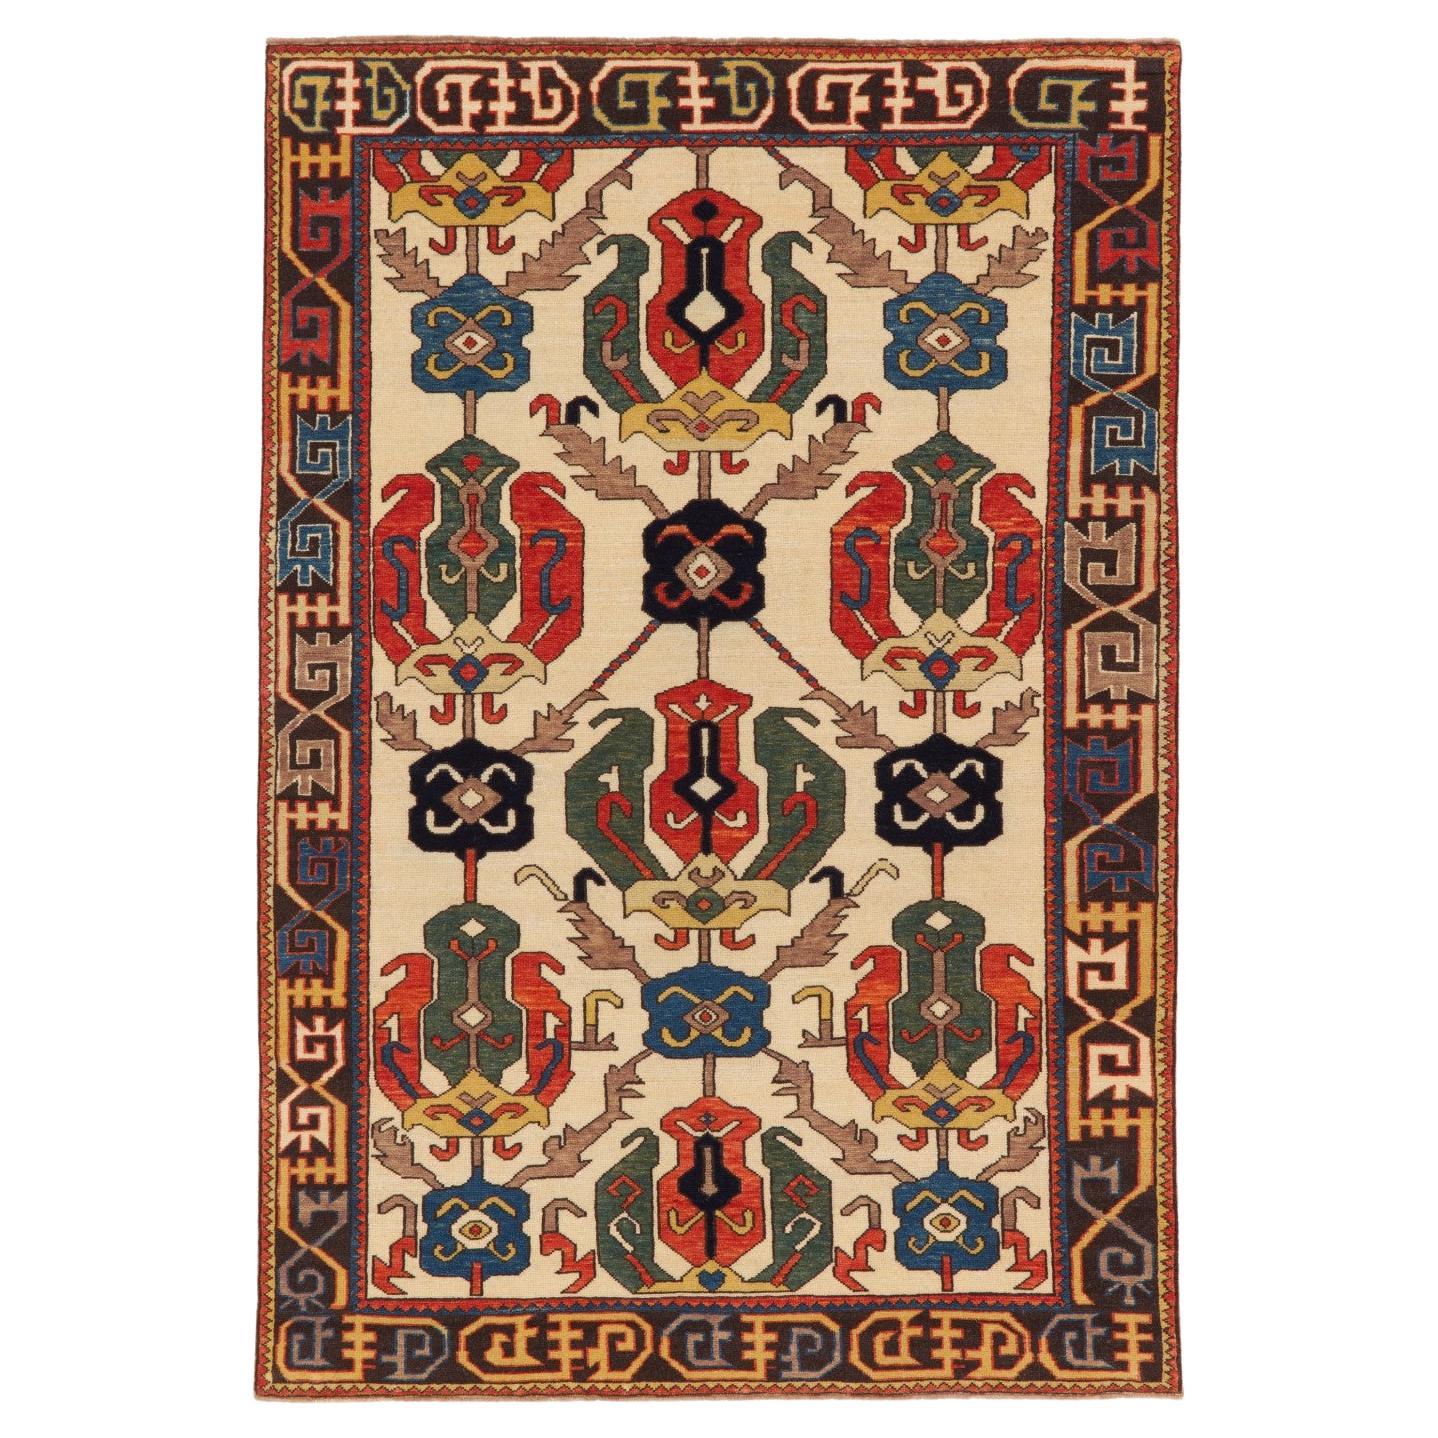 Ararat Rugs Kuba Rug with Palmettes Caucasian 19th C. Revival Rug, Natural Dyed For Sale